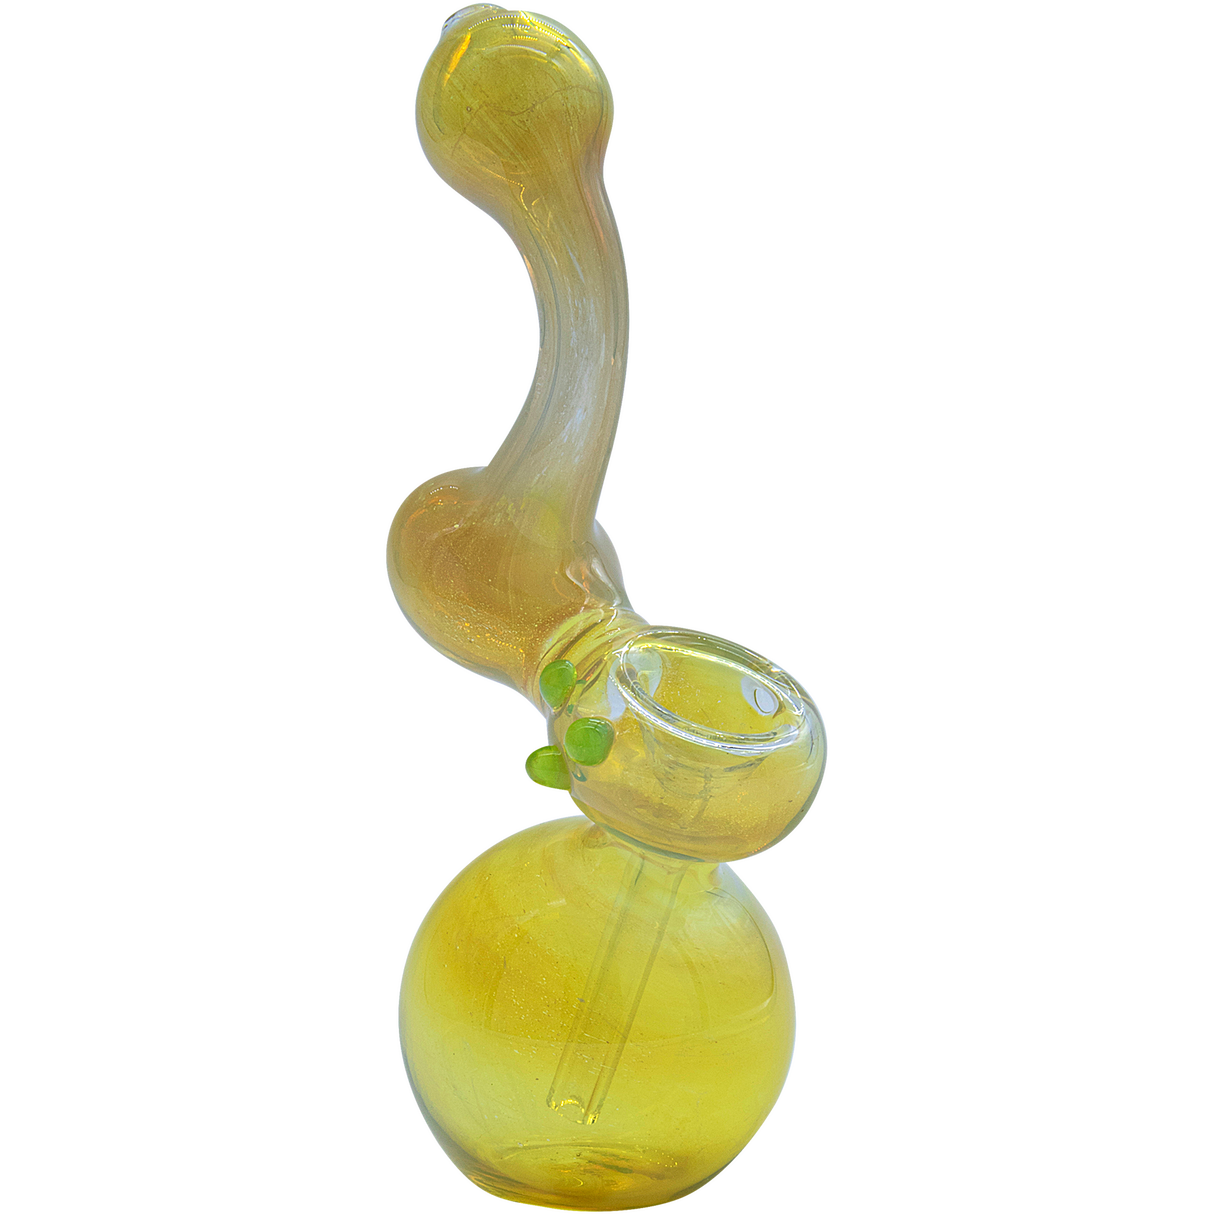 LA Pipes "Silver Sherlock" Fumed 6" Bubbler Pipe in Yellow, Front View on White Background